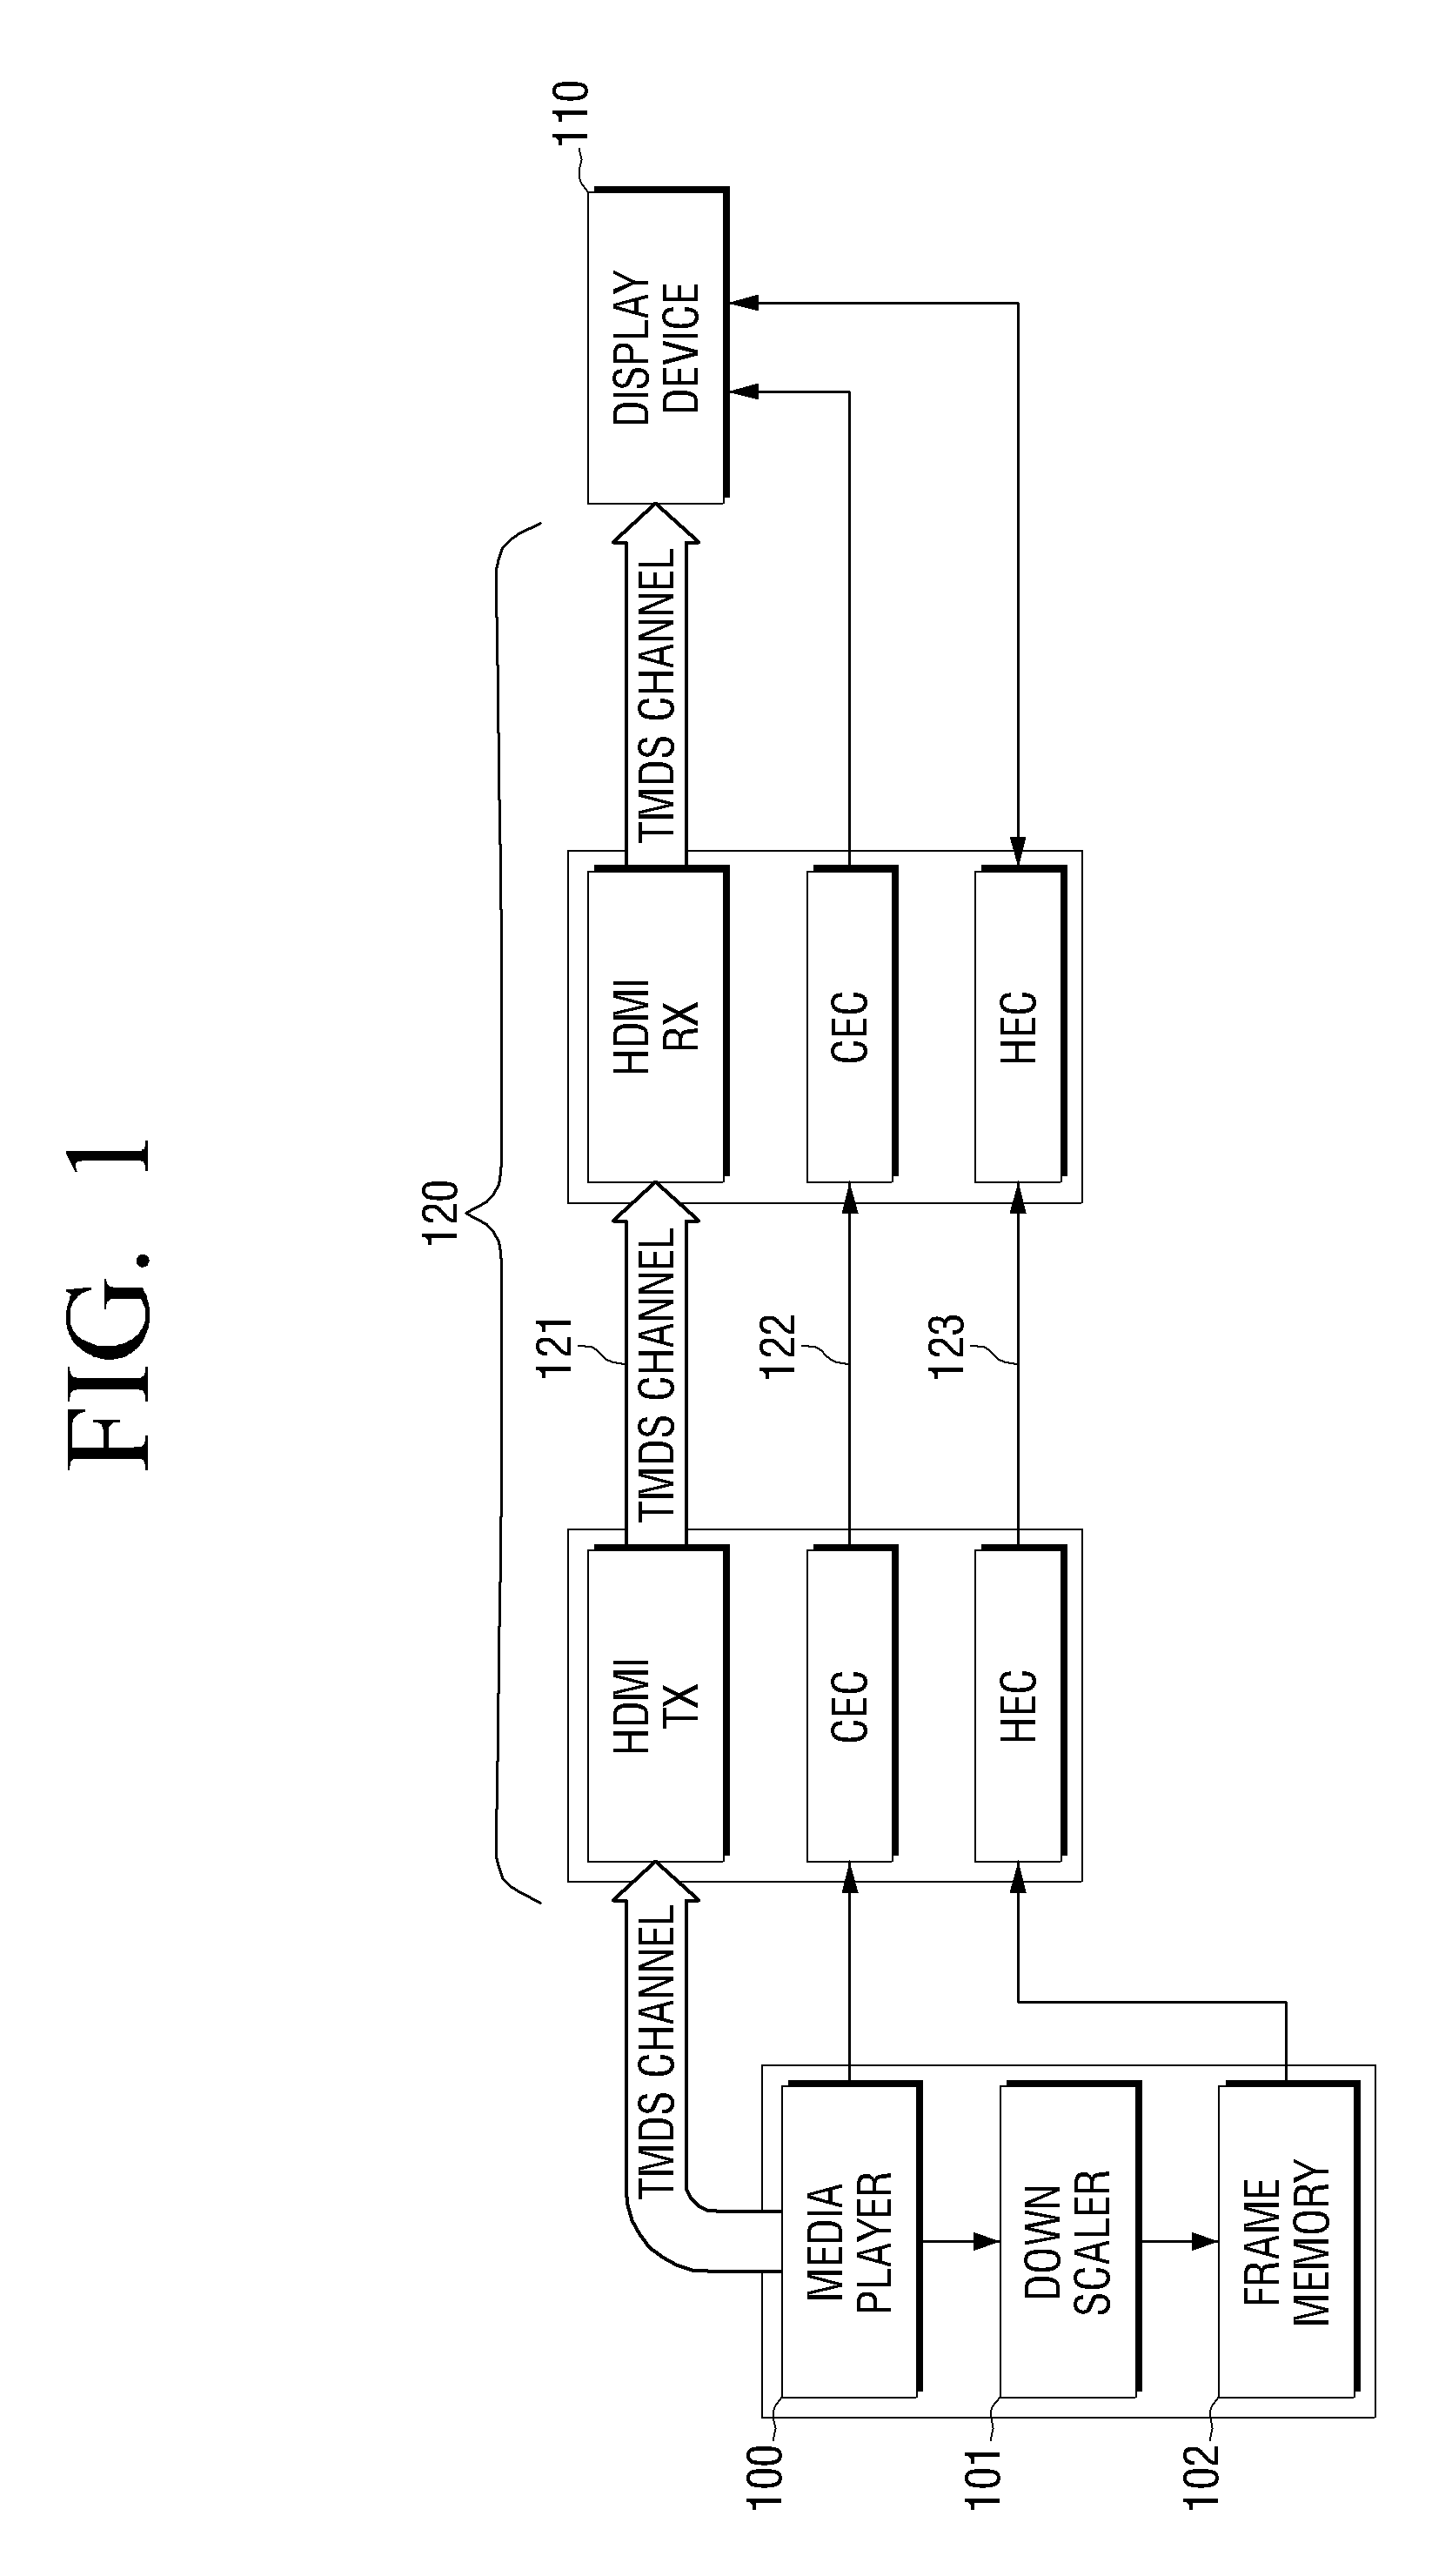 Method and apparatus for displaying video signals from a plurality of input sources